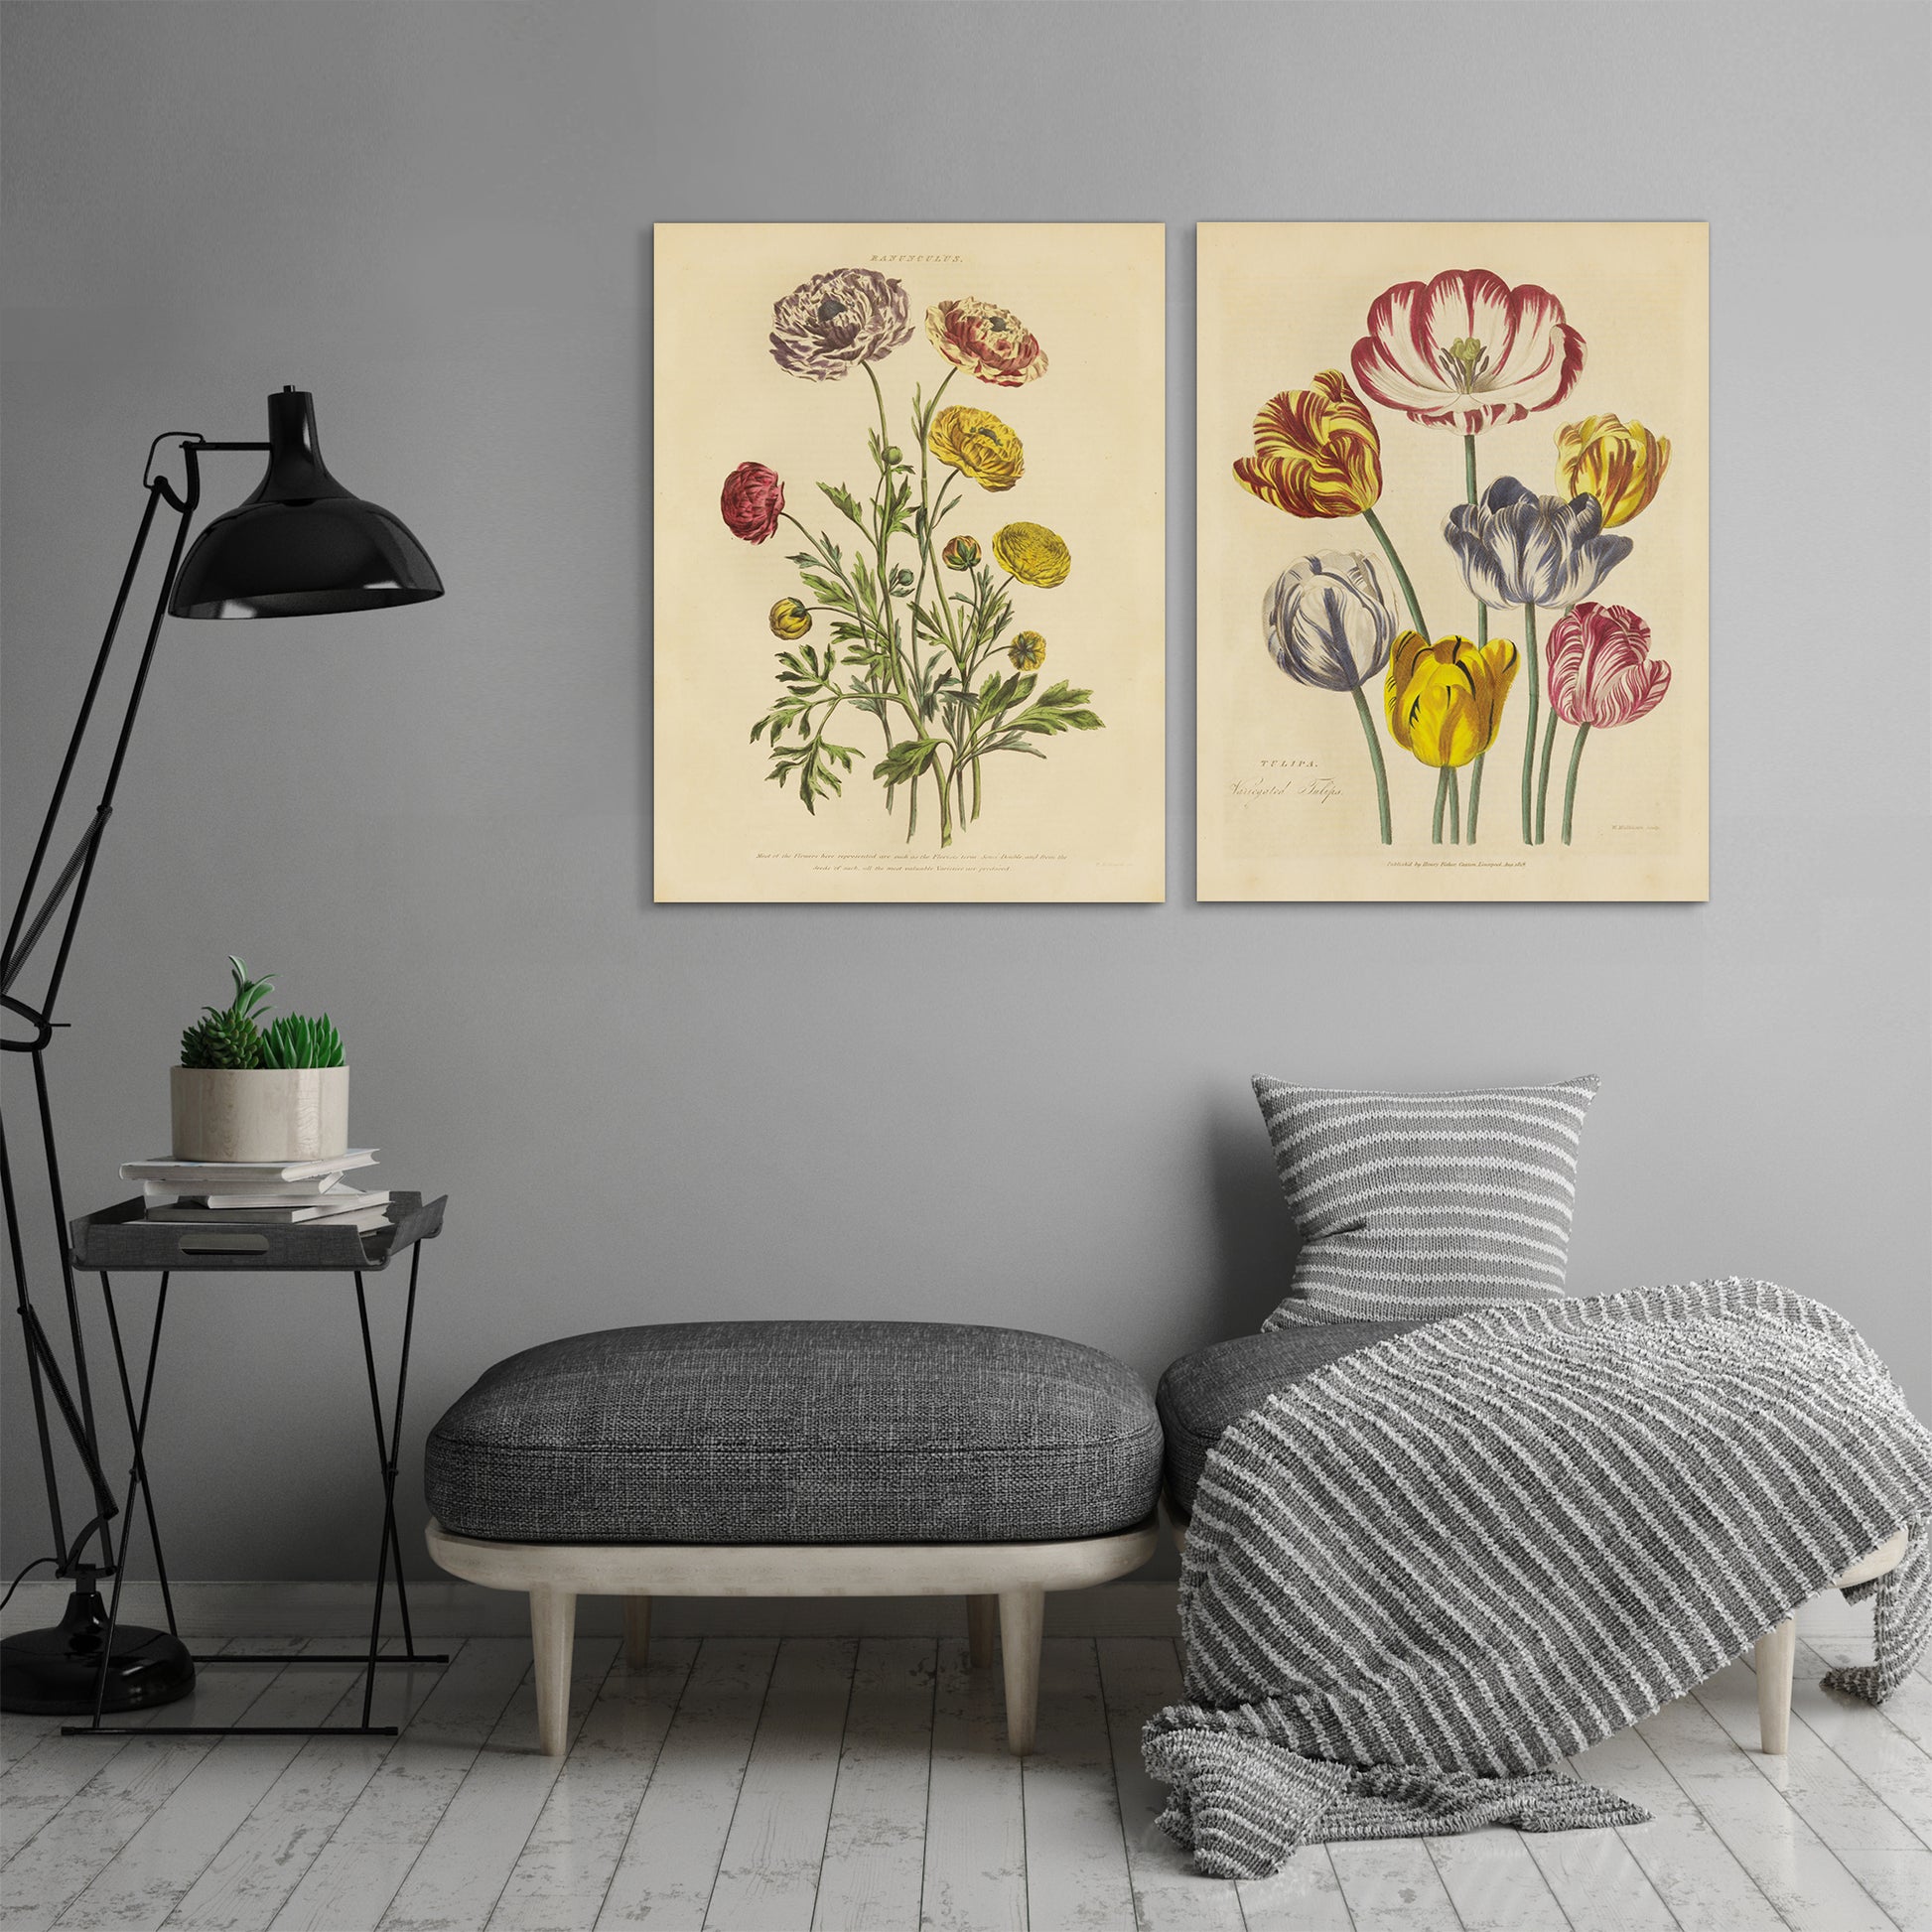  Herbal Botanical by Wild Apple - 2 Piece Wrapped Canvas Set - Art Set - Americanflat